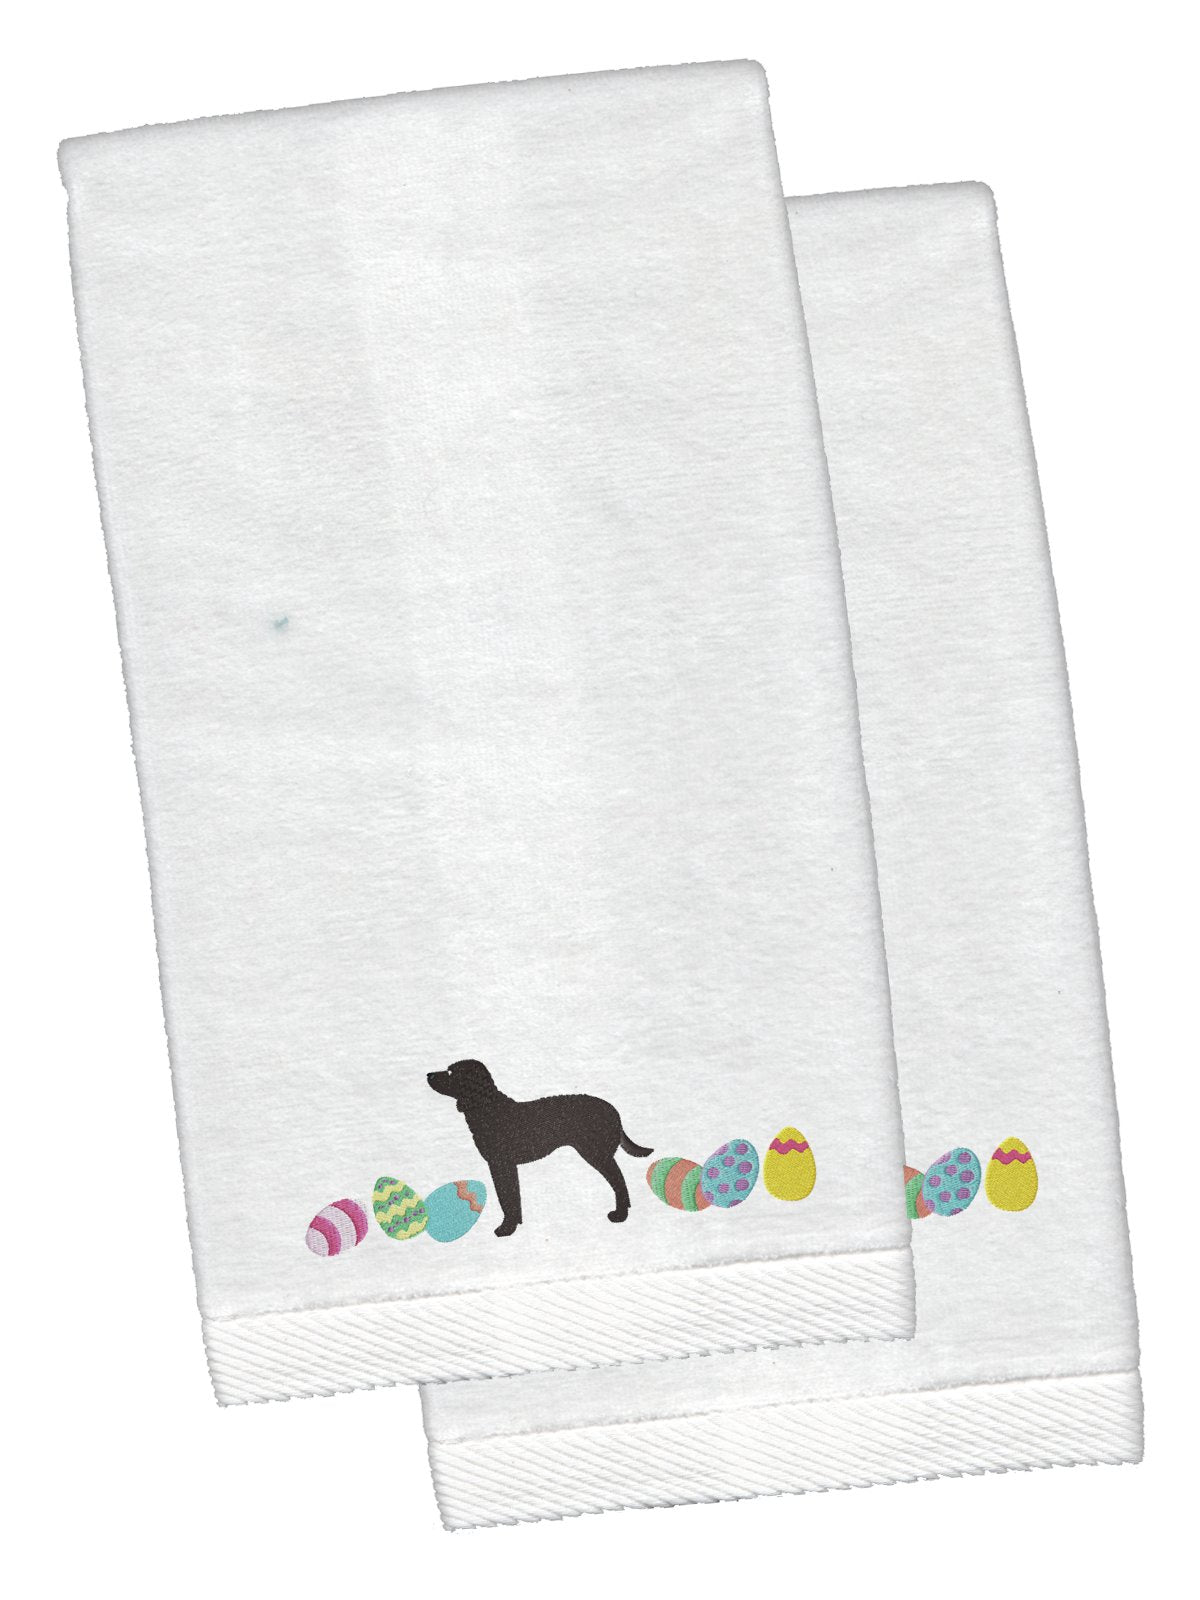 American Water Spaniel Easter White Embroidered Plush Hand Towel Set of 2 CK1597KTEMB by Caroline&#39;s Treasures